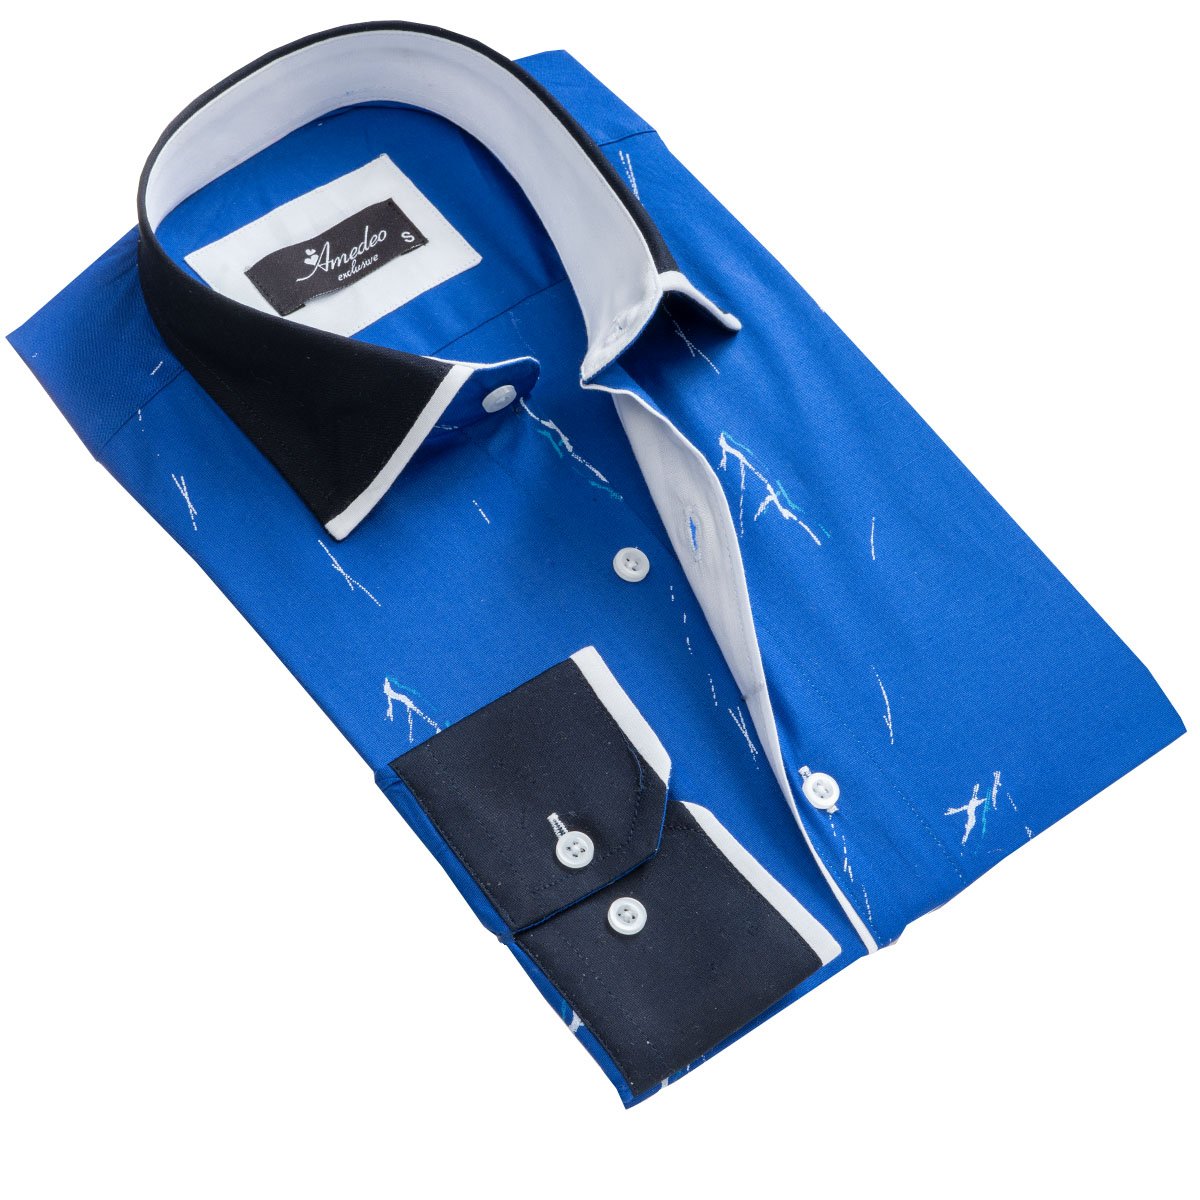 Medium Blue Mens Slim Fit Designer Dress Shirt - tailored Cotton Shirts for Work and Casual Wear - Amedeo Exclusive